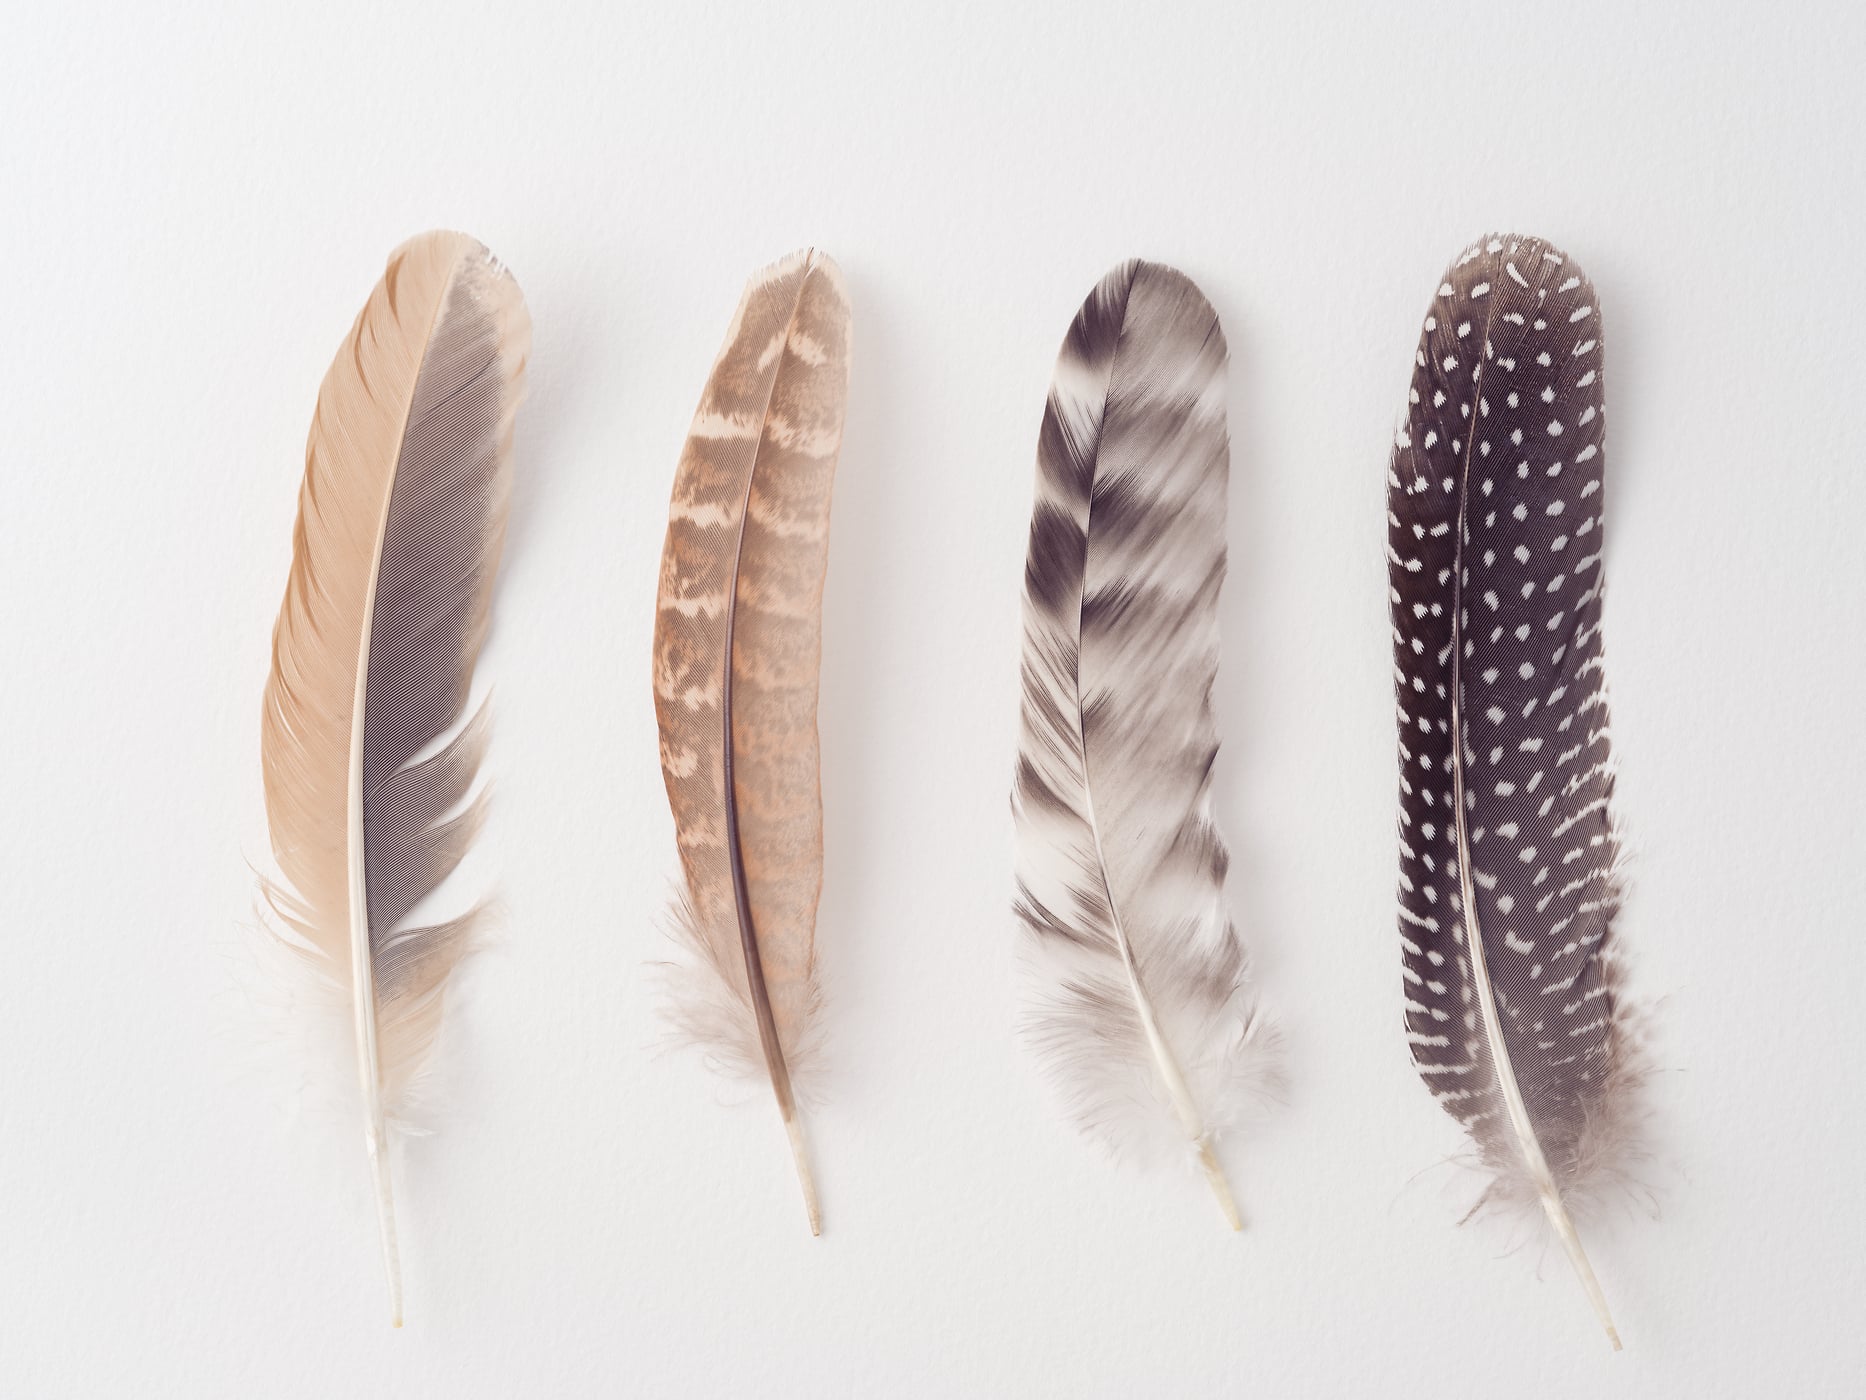 407 megapixels! A very high resolution, large-format fine art photo of feathers; still life photograph created by Assaf Frank.